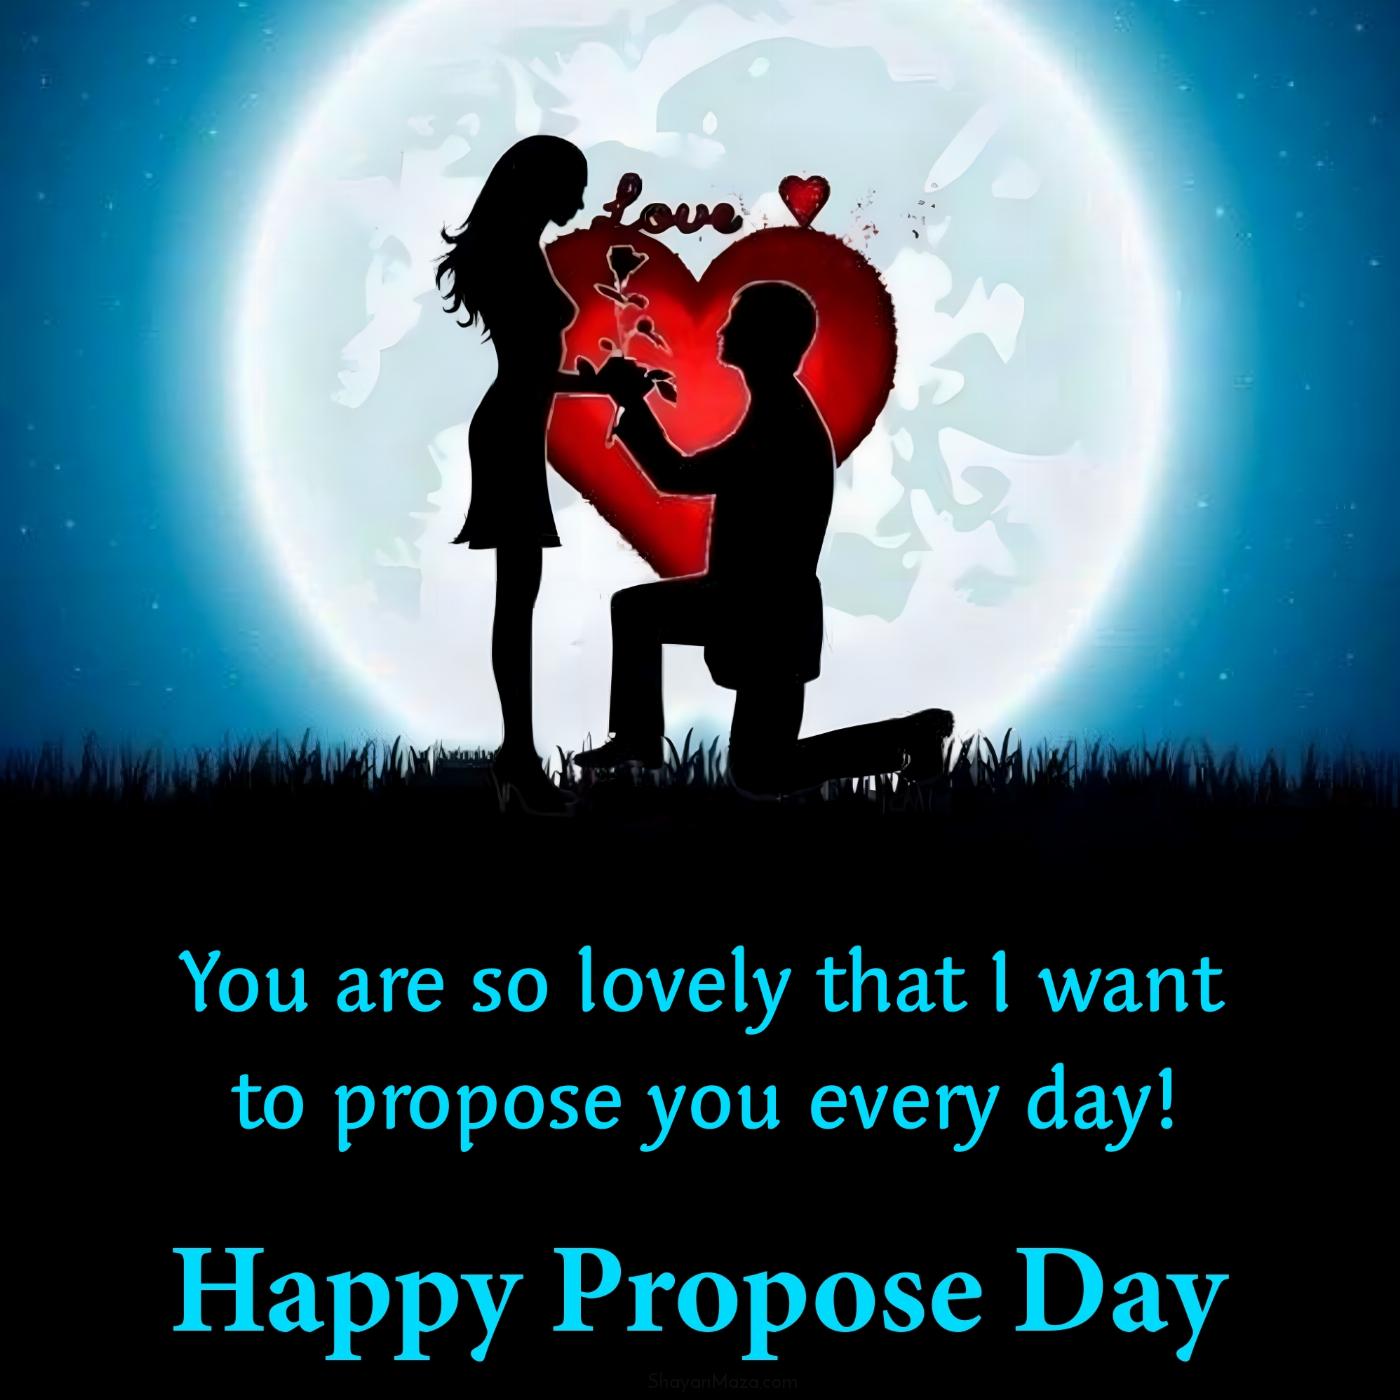 You are so lovely that I want to propose you every day